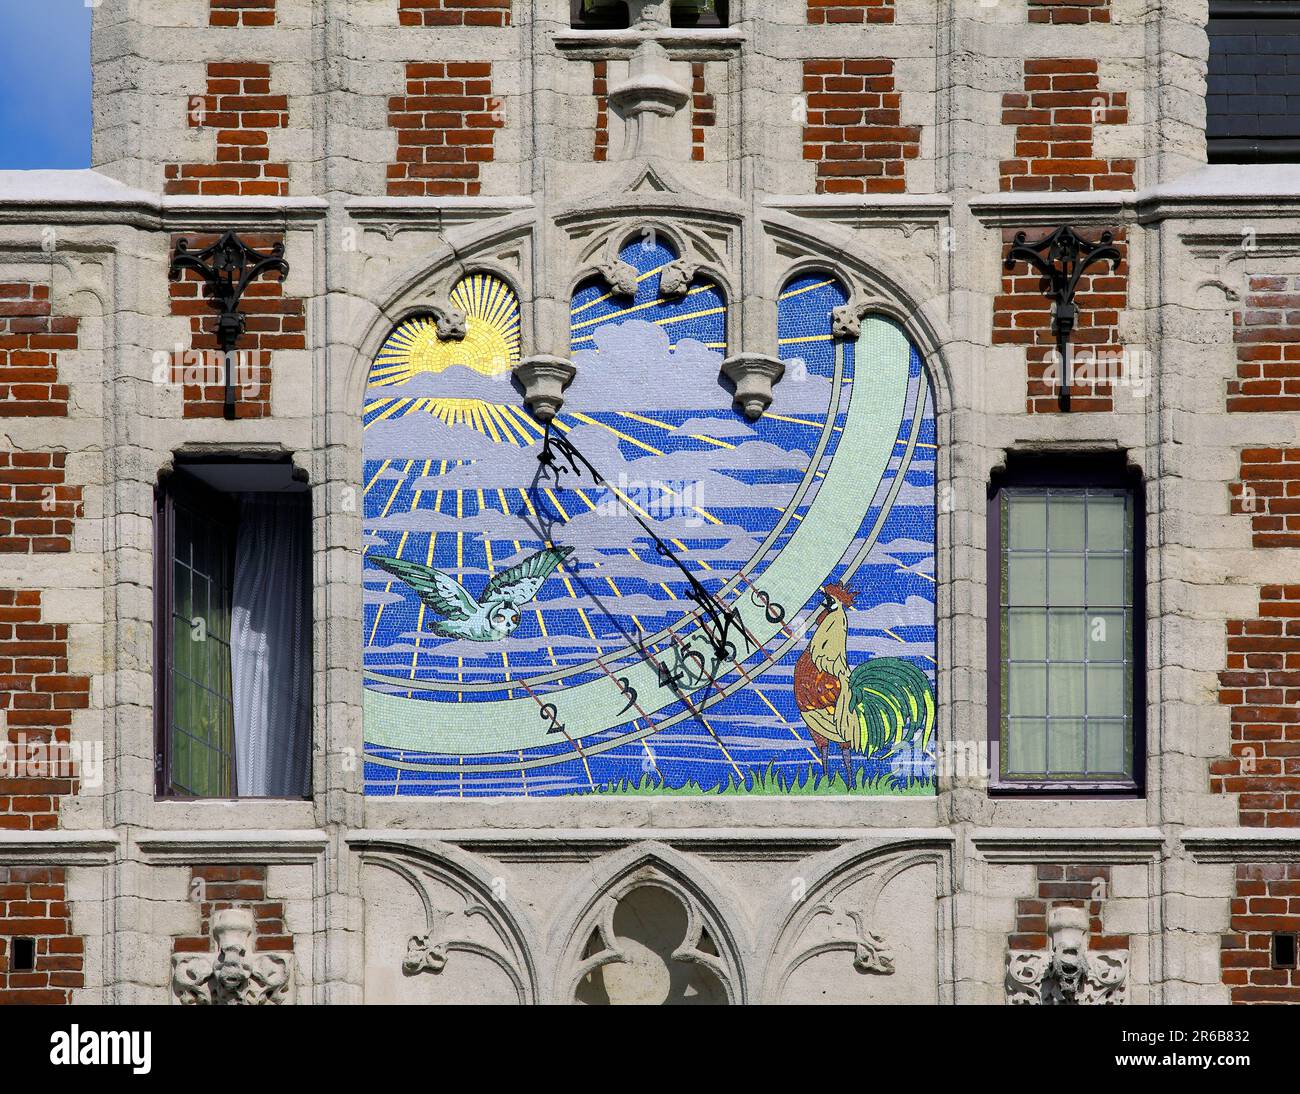 A magnificent mosaic sundial, high up on the side of the former Delacre Pharmacy, in the heart of Brussels. Stock Photo